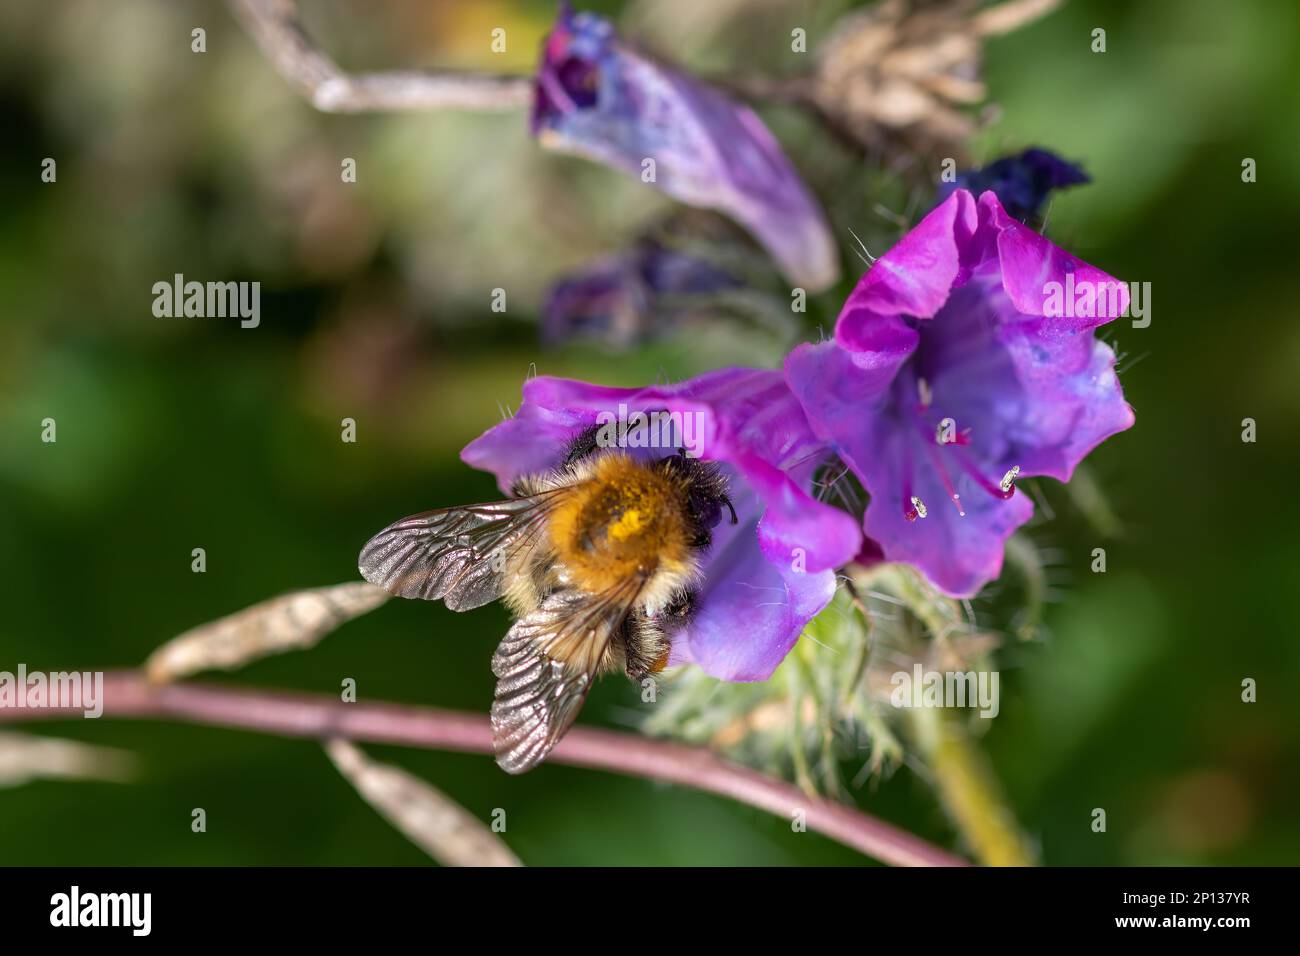 common carder bee on pretty blue and pink flowers of Viper's Bugloss Echium Vulgare Stock Photo